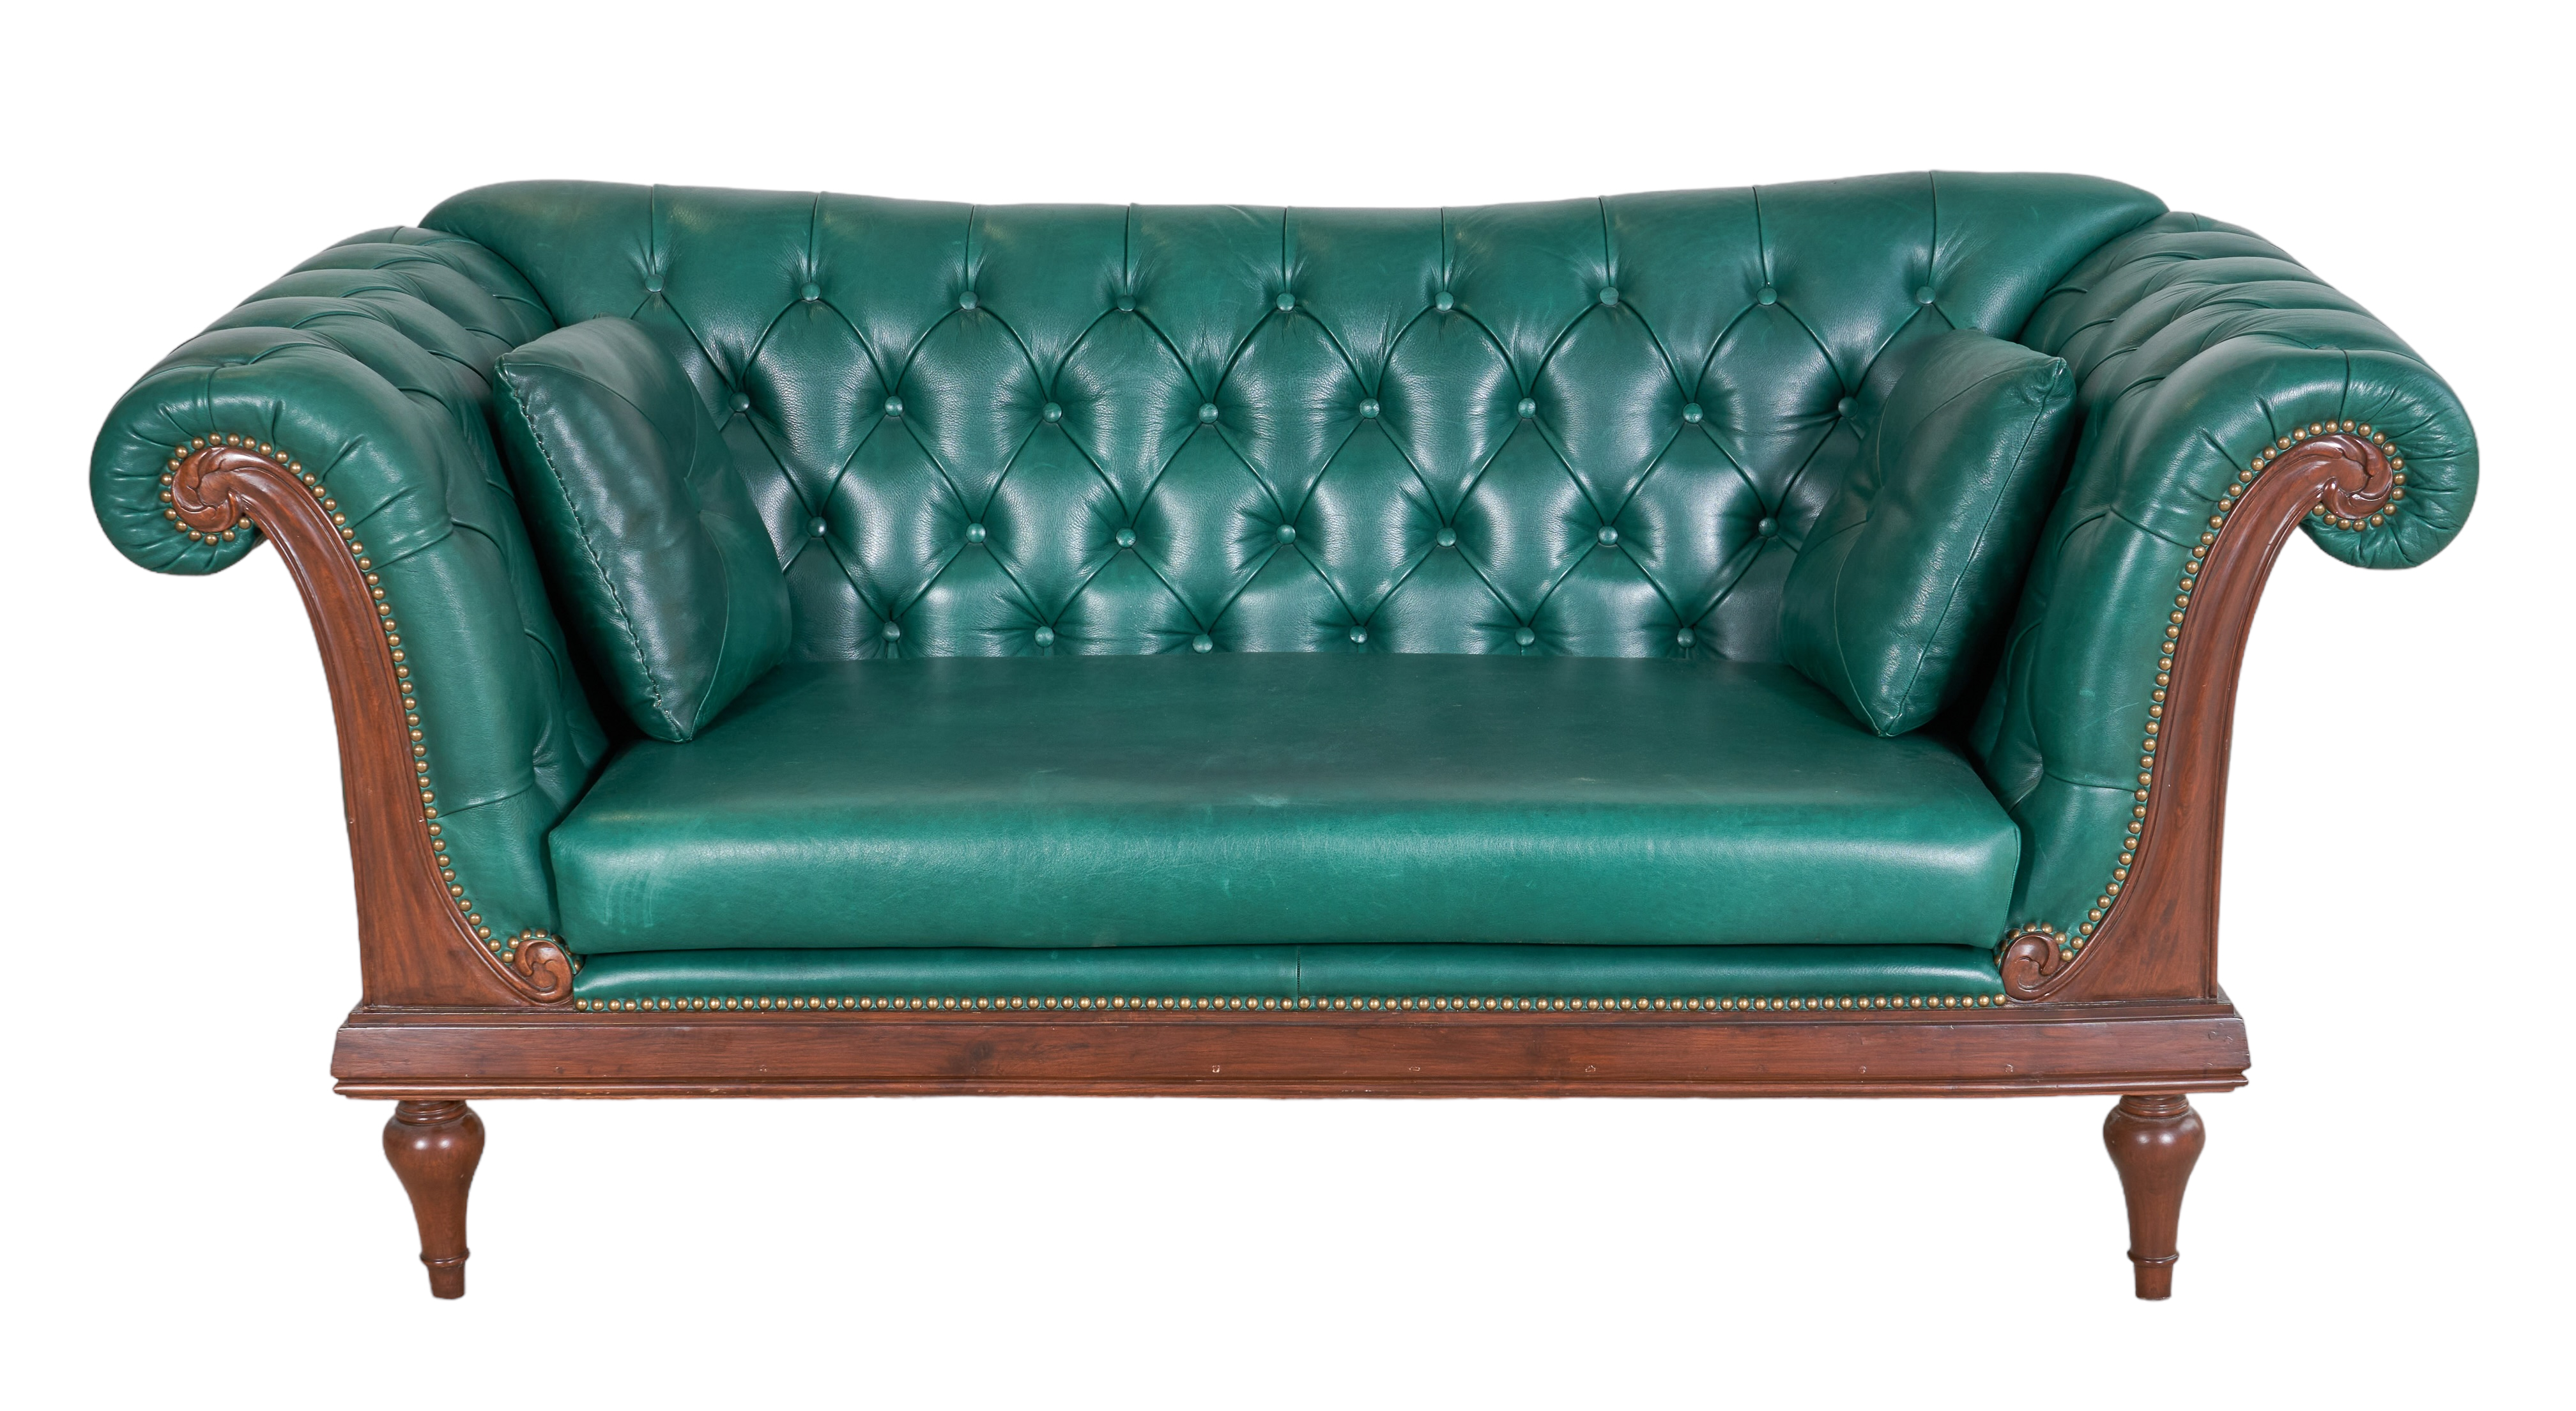 Leather Chesterfield sofa green 3b10ab